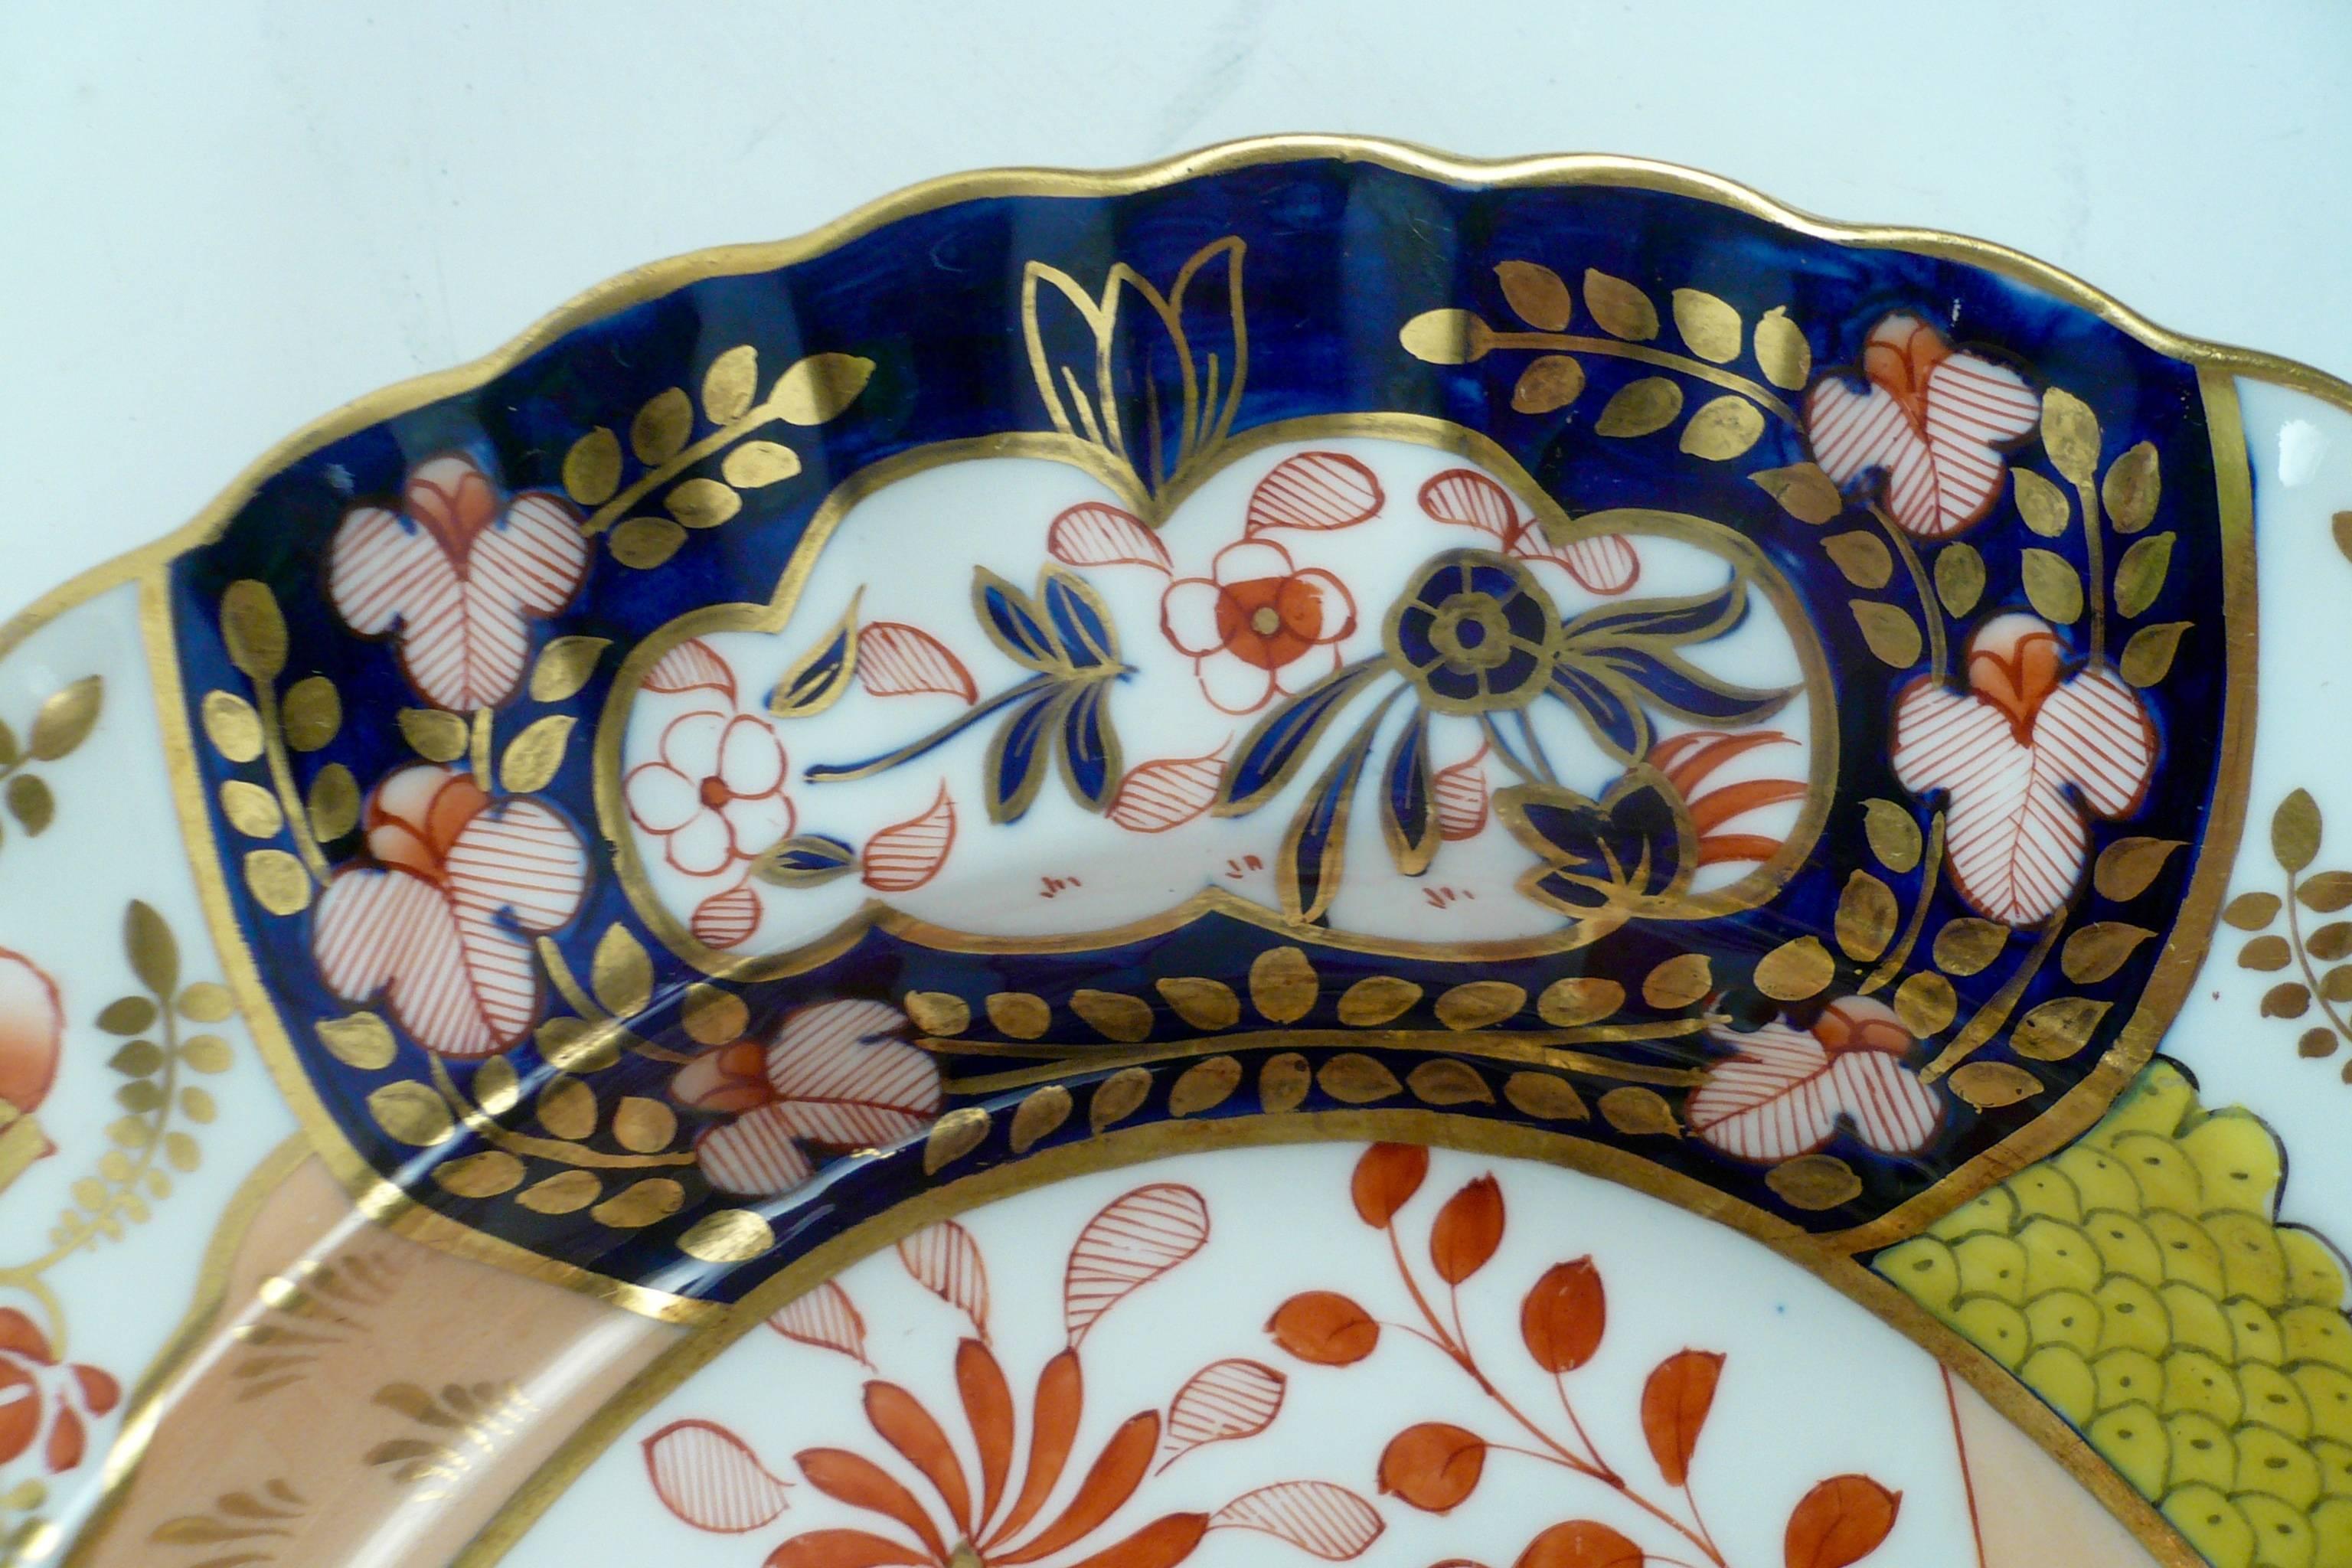 This beautifully hand-painted platter with traditional Imari designs is richly gilded, and is in excellent condition.